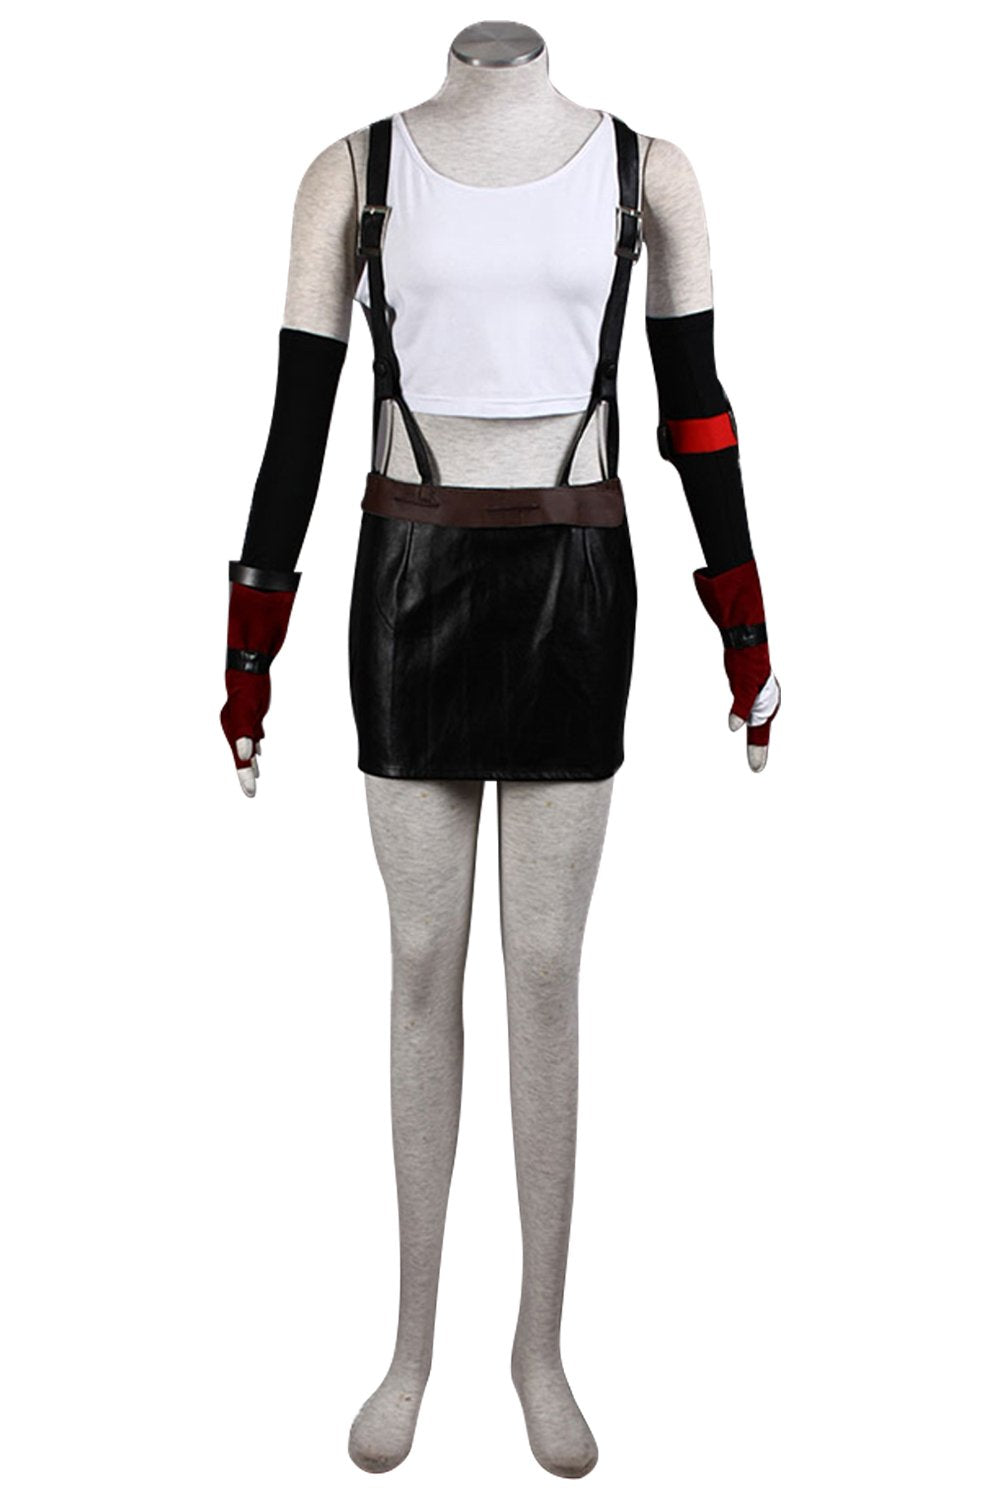 Final Fantasy VII FF7 Tifa Lockhart Outfit Cosplay Costume